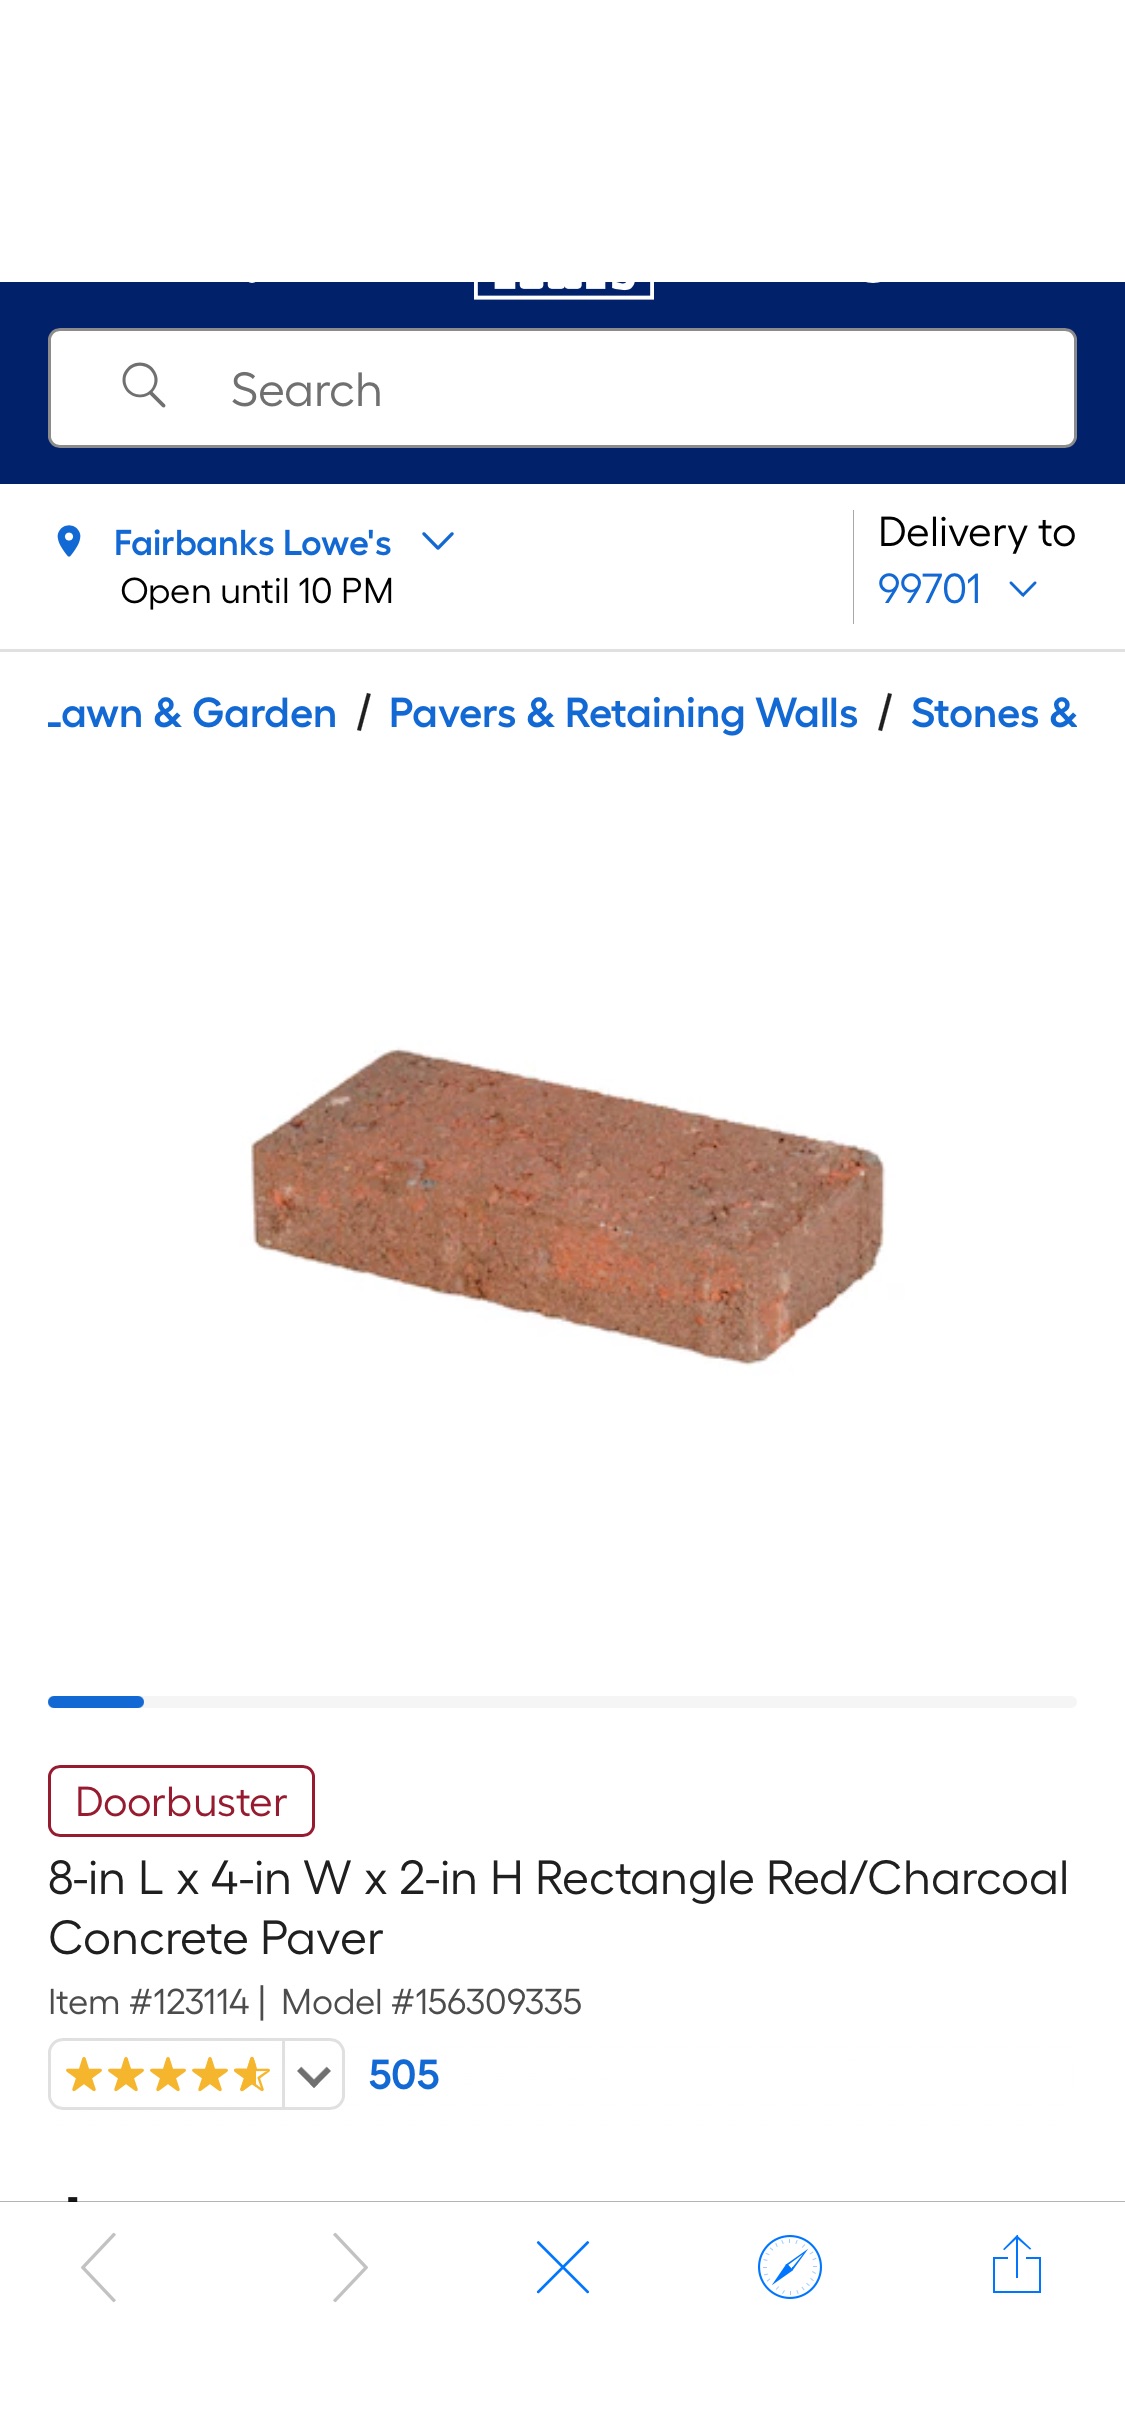 8-in L x 4-in W x 2-in H Rectangle Red/Charcoal Concrete Paver in the Pavers & Stepping Stones department at Lowes.com